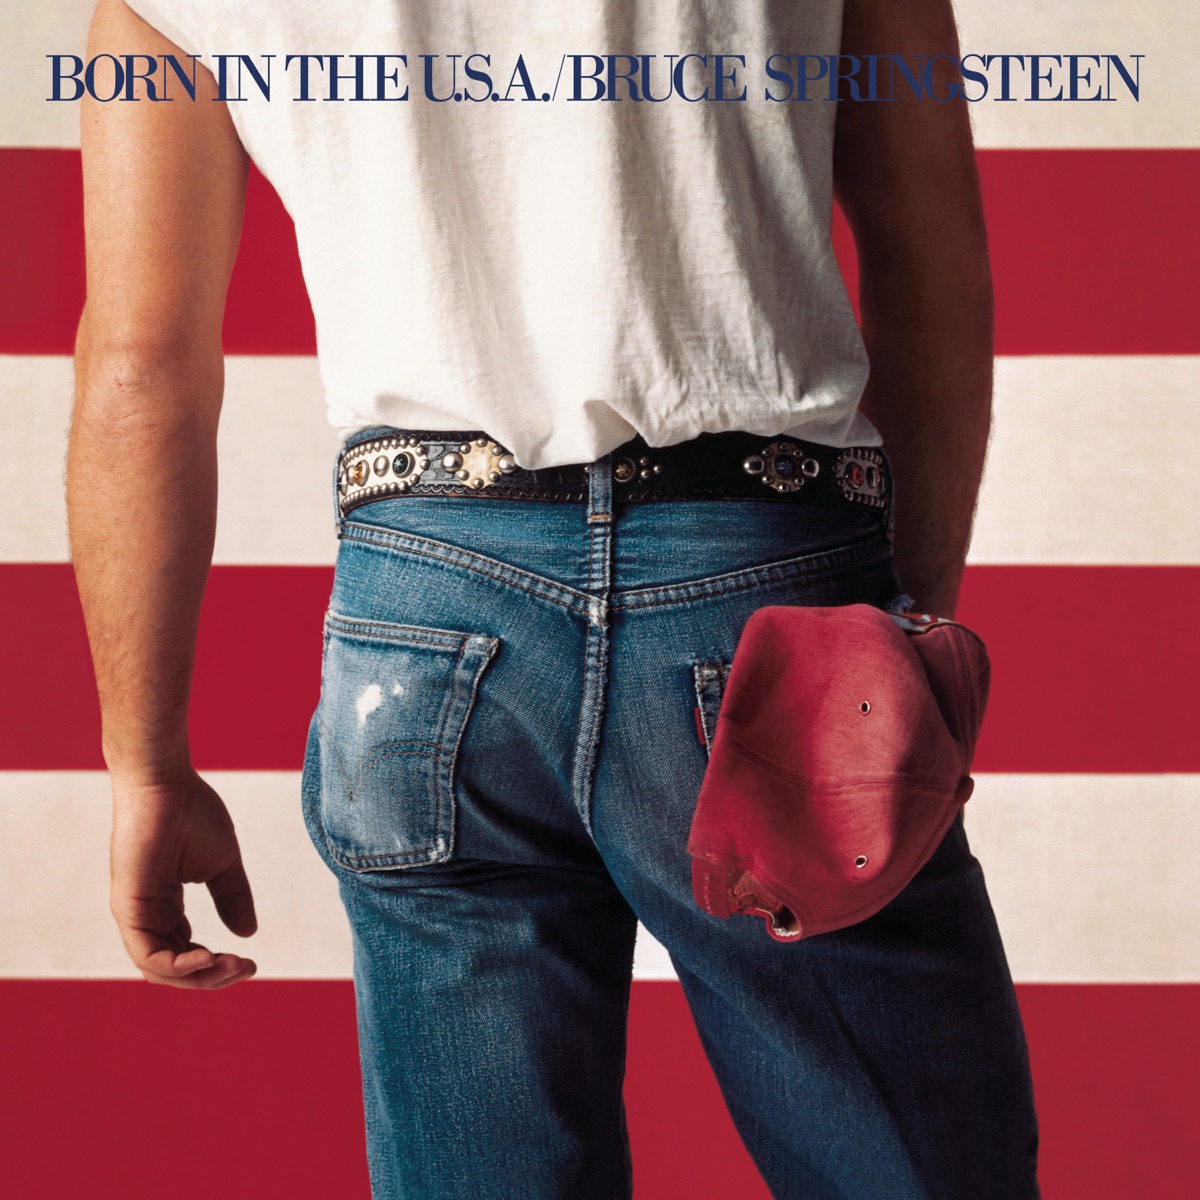 Born In the U.S.A. - Album by Bruce Springsteen - Apple Music